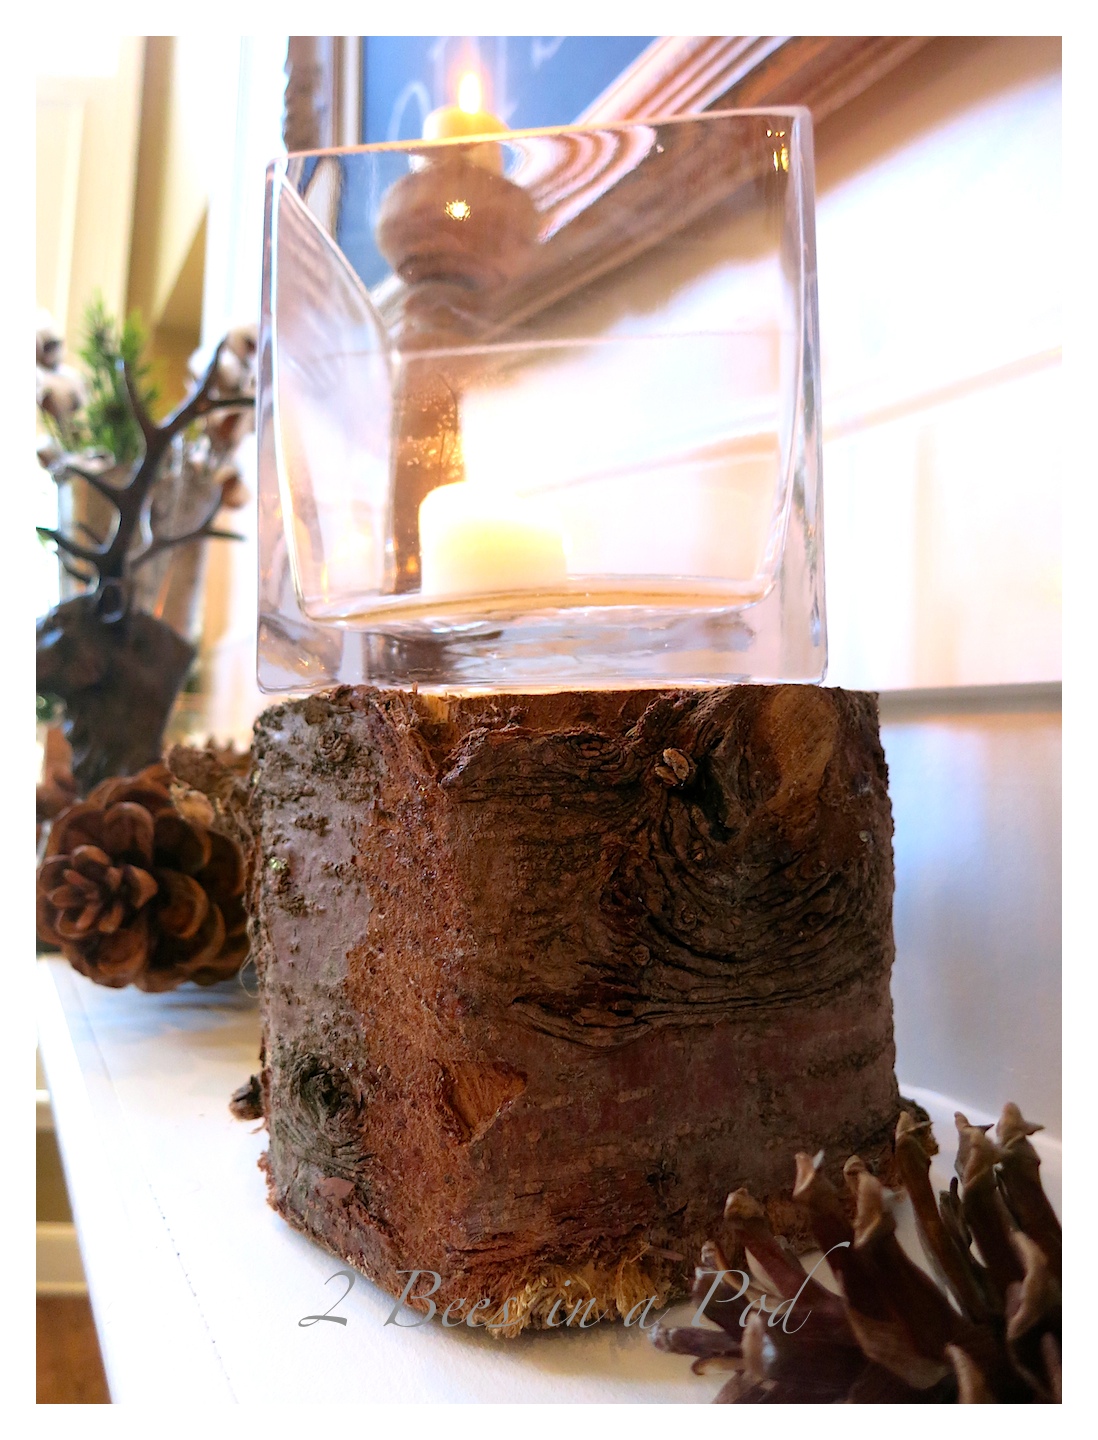 Winter Mantel Decor - natural elements of twigs,wood,  pinecones, cotton and feathers enhanced by candlelight and deer bust